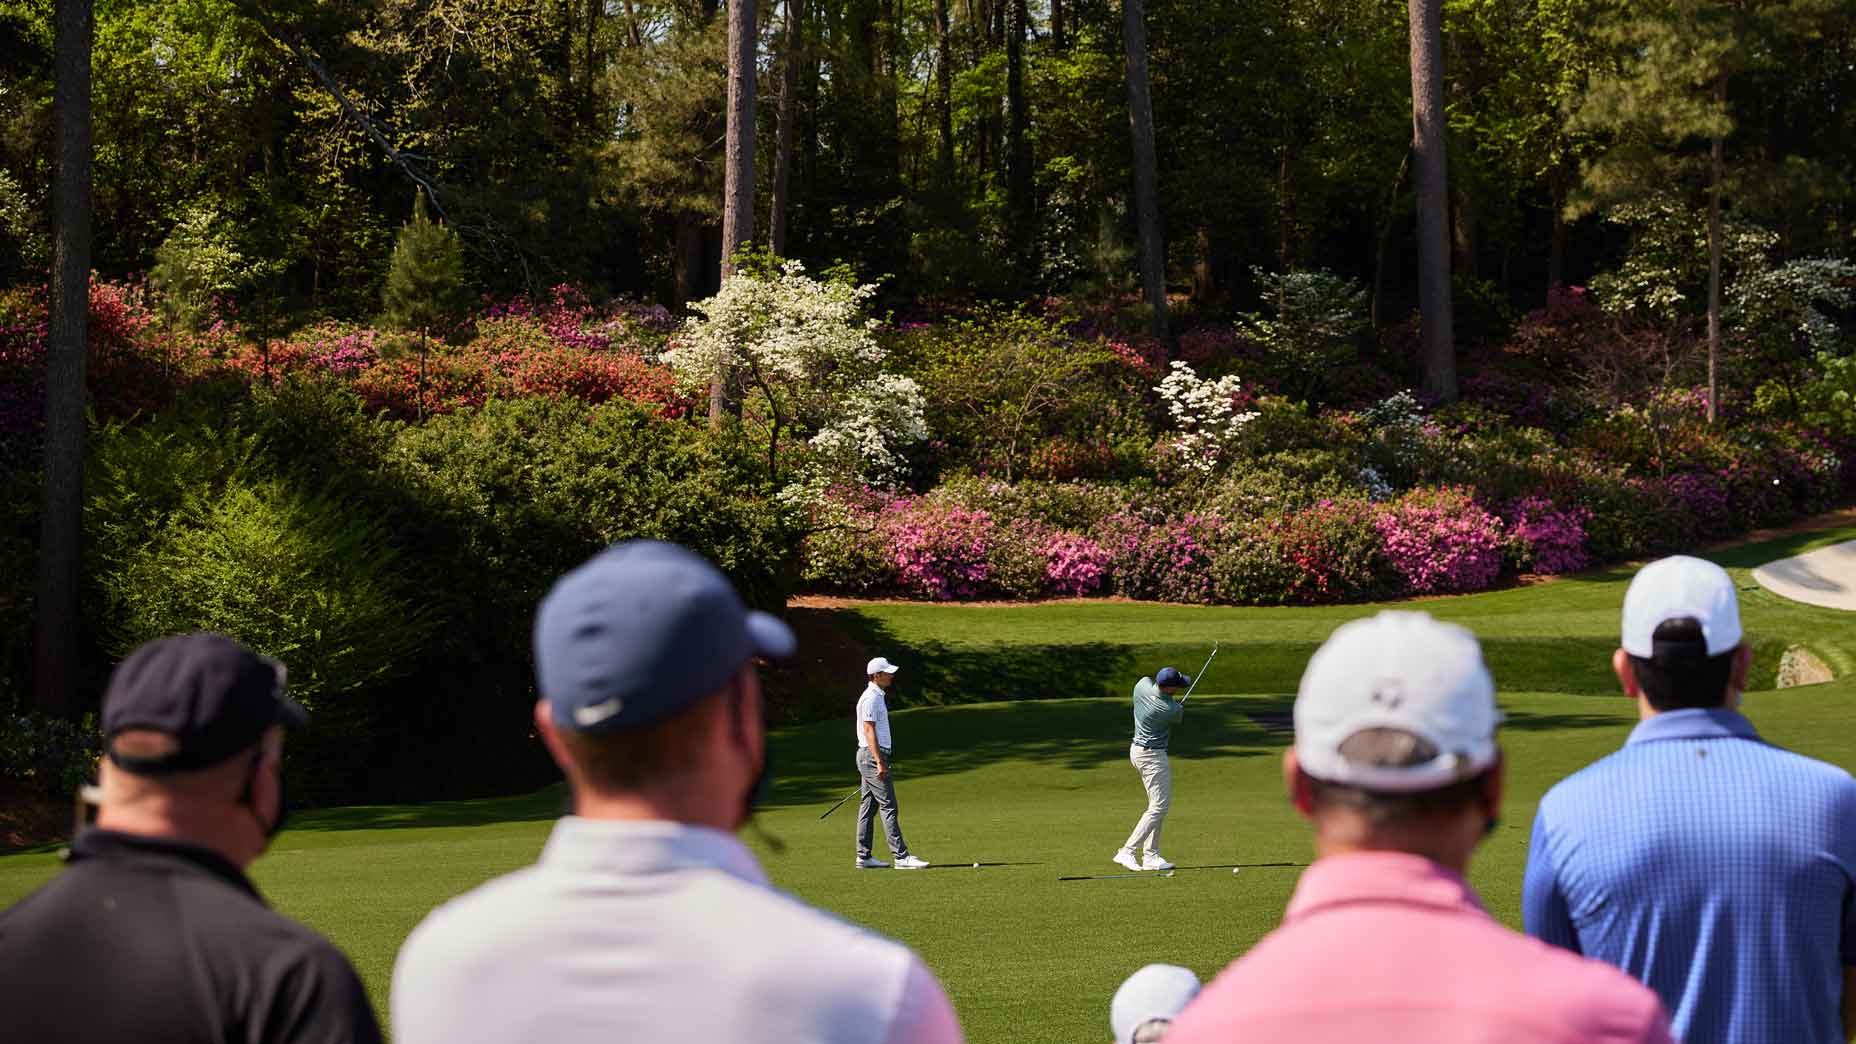 Masters 2022 tickets Here's how to get tickets for next year's Masters